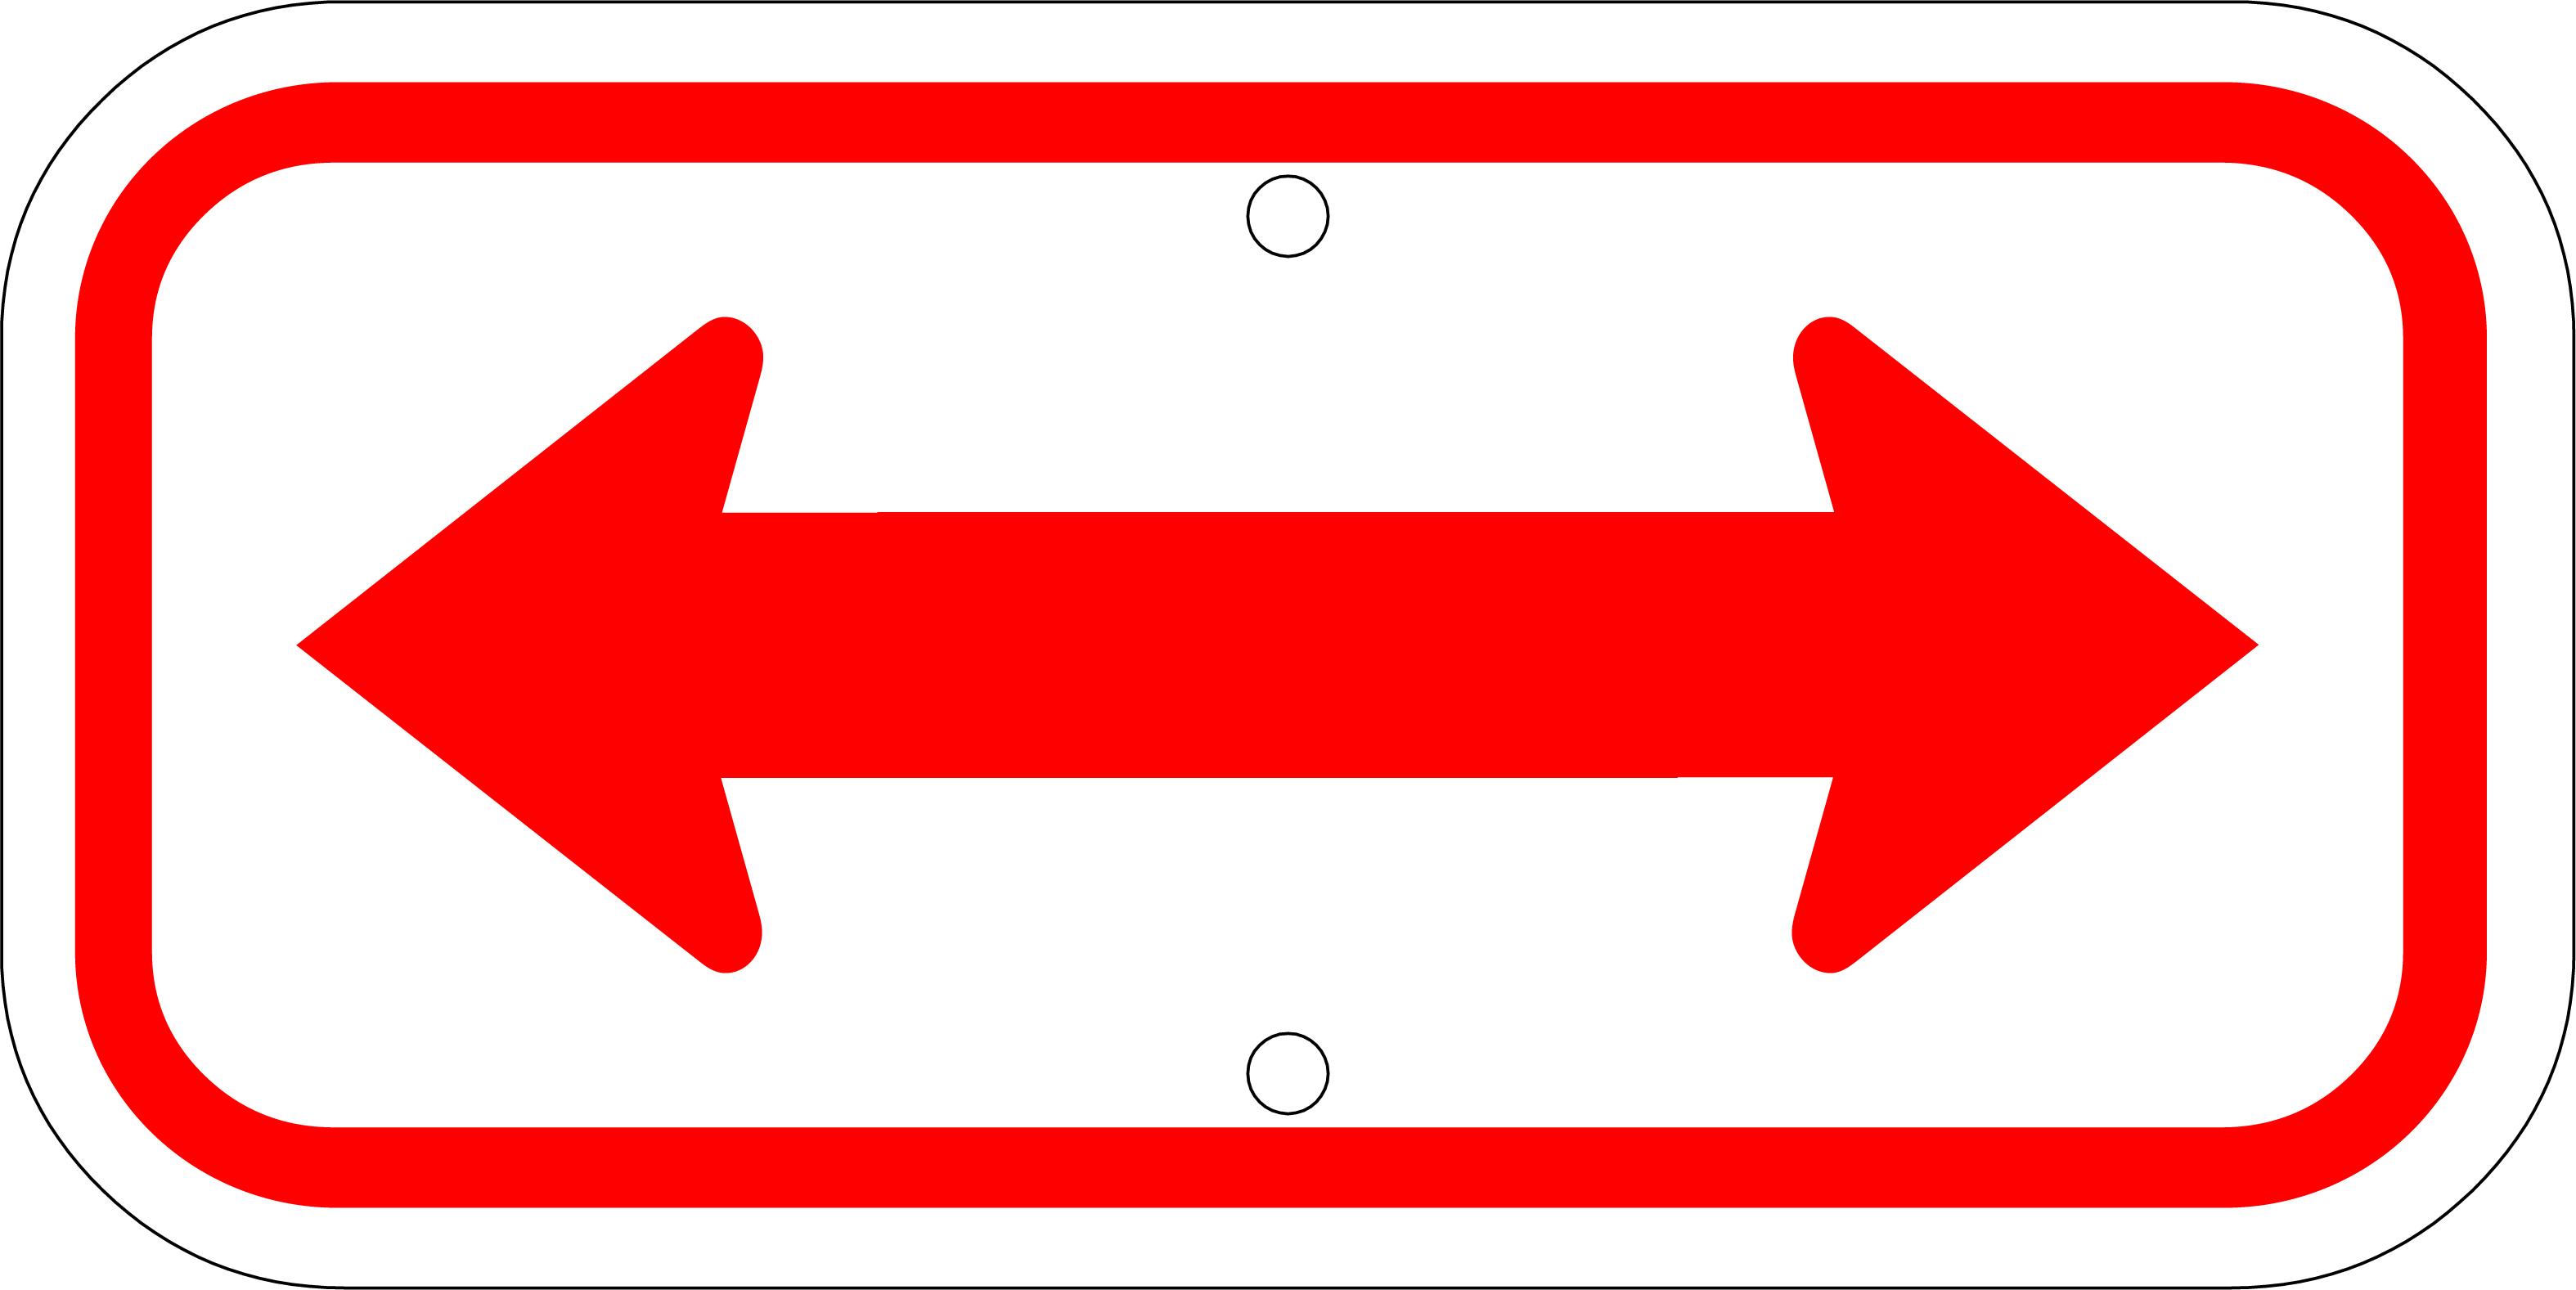 Double Red Arrow Logo - W.G.N Flag & Decorating Co. > Parking/Traffic Control/Trespassing ...